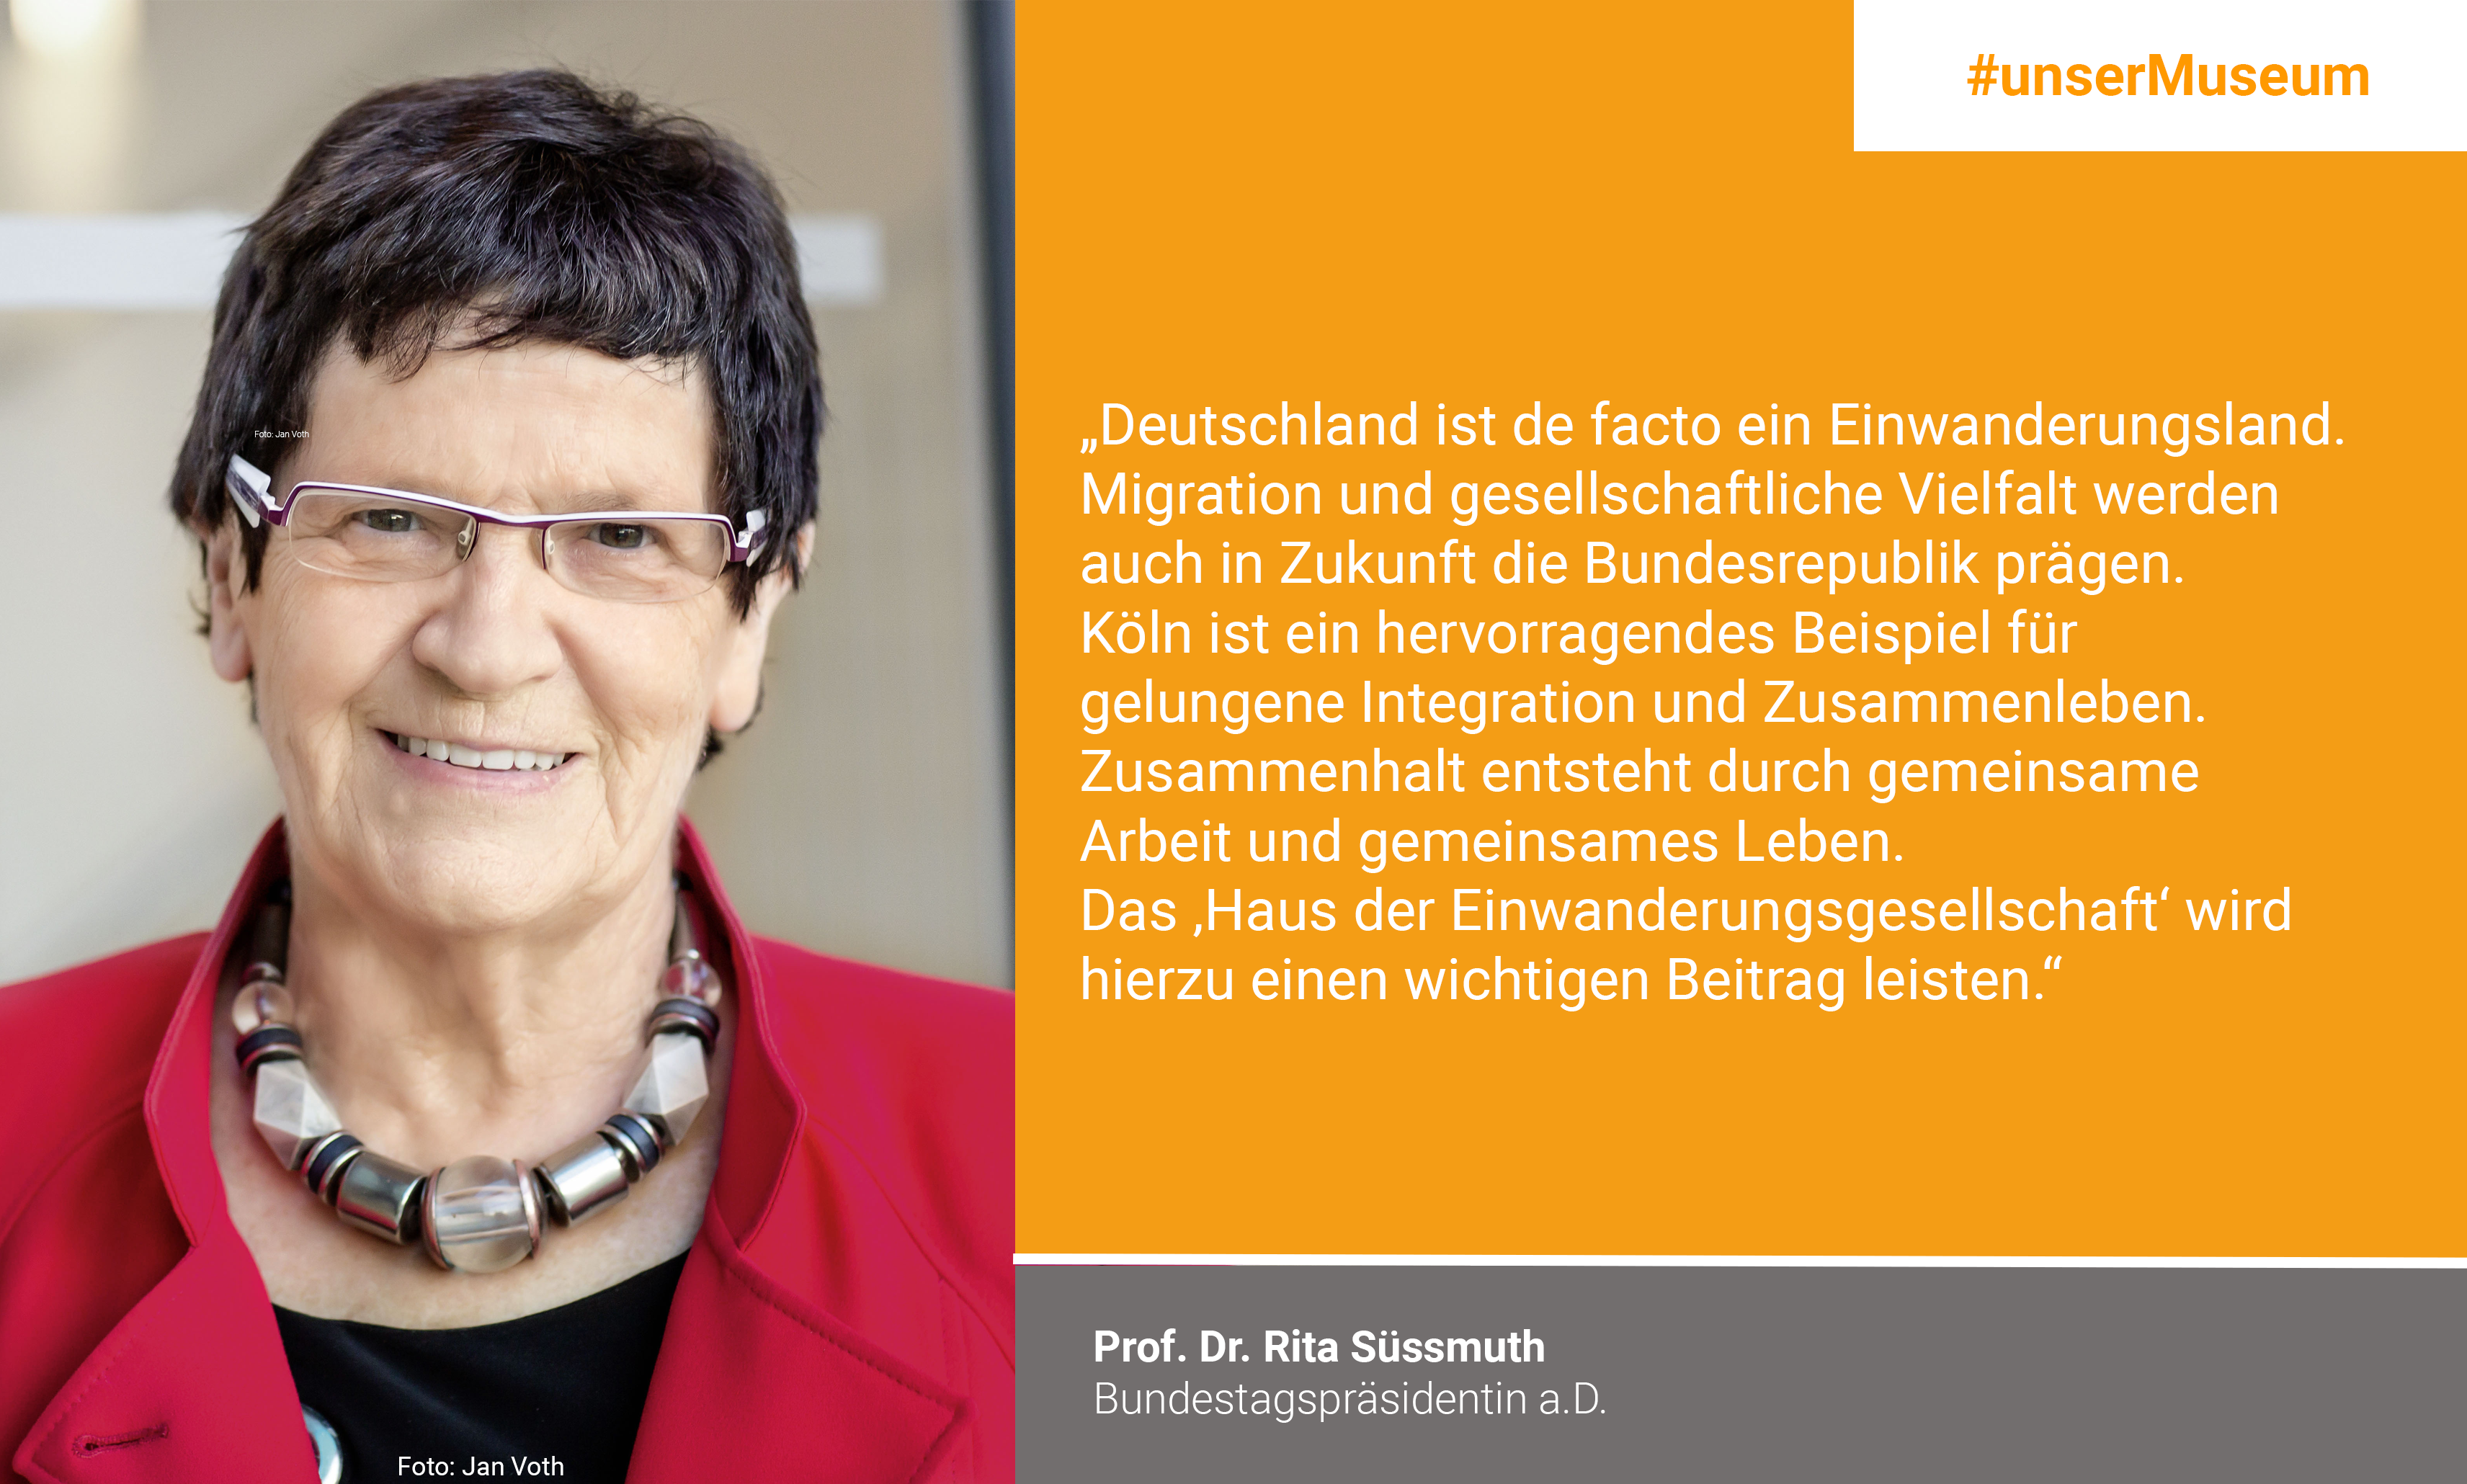 Prof. Dr. Rita Süßmuth, retired President of the Bundestag / Patroness "House of Immigration Society": "Germany is de facto an immigration country. Migration and social diversity will continue to shape the Federal Republic in the future. The fact that we accept refugees in large numbers is not anchored in all parts of the population. The events in 2015 also triggered uncertainty and fears among many. Cologne is an excellent example of successful integration and living together. Cohesion comes from working together and living together. The “House of Immigration Society” will make an important contribution to this."